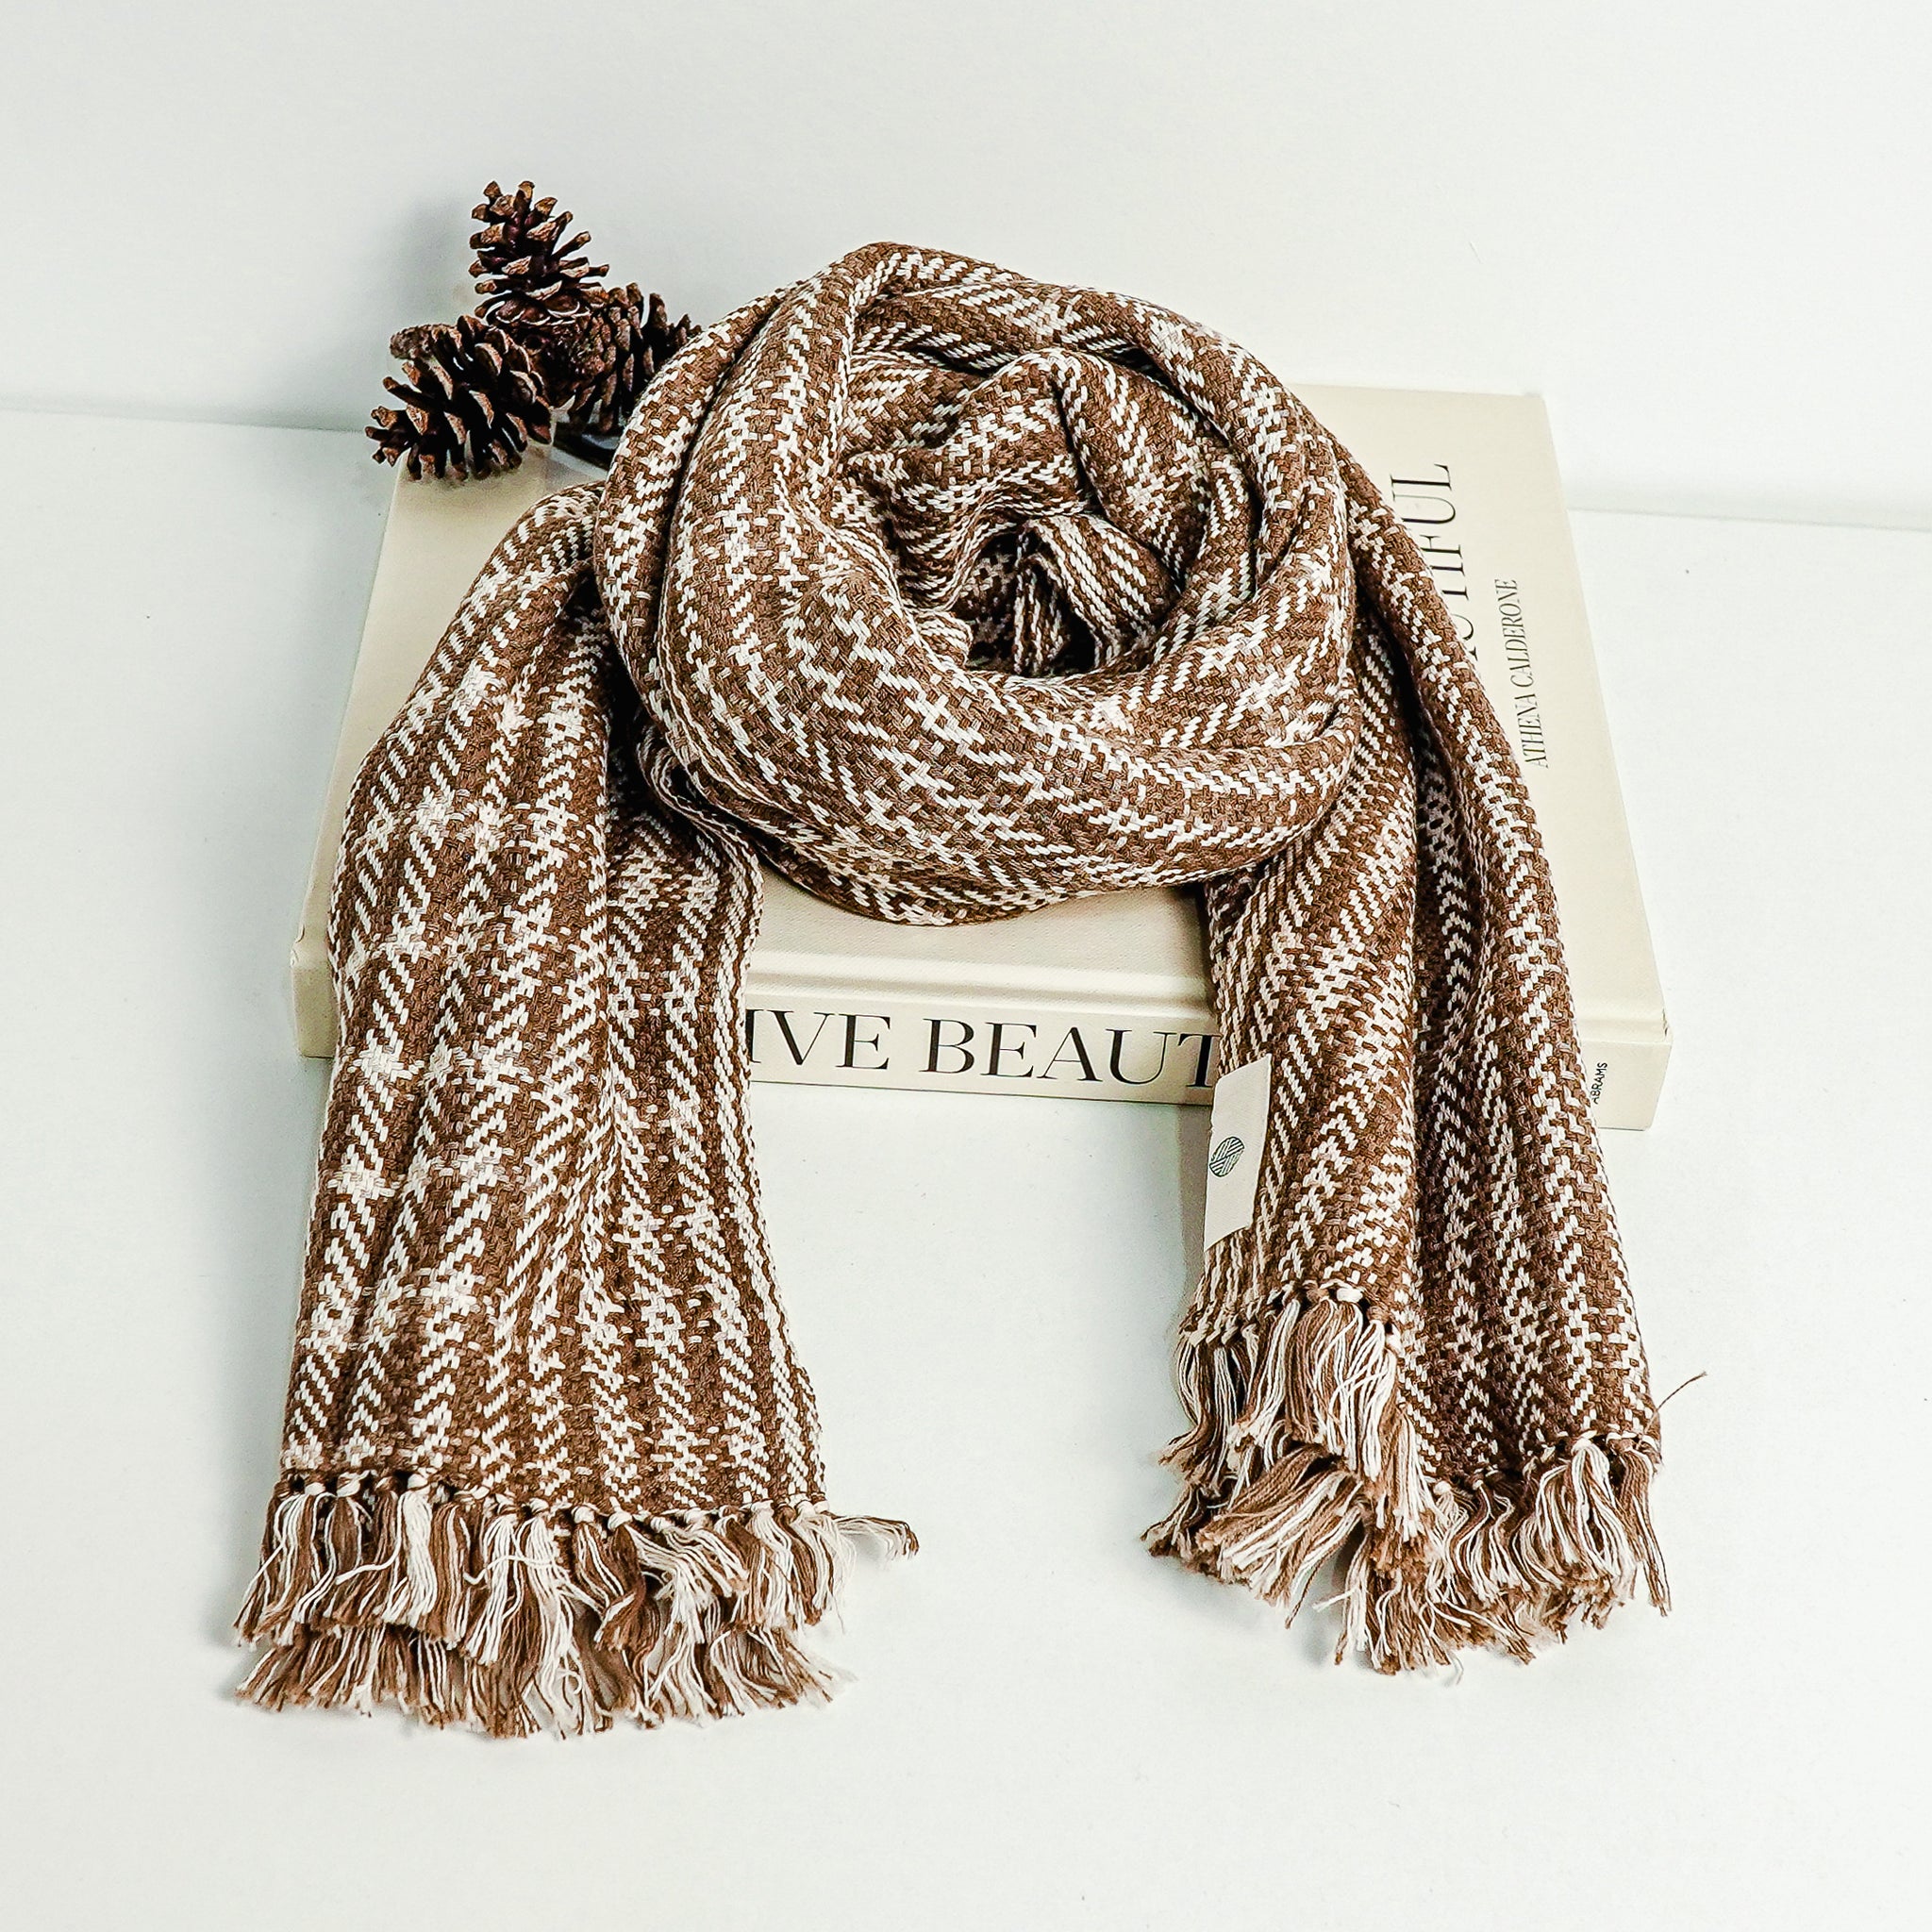 Made from super soft cotton, this scarf is comfy and versatile. Use it as a travel wrap on flights or styled as a scarf or shawl. 